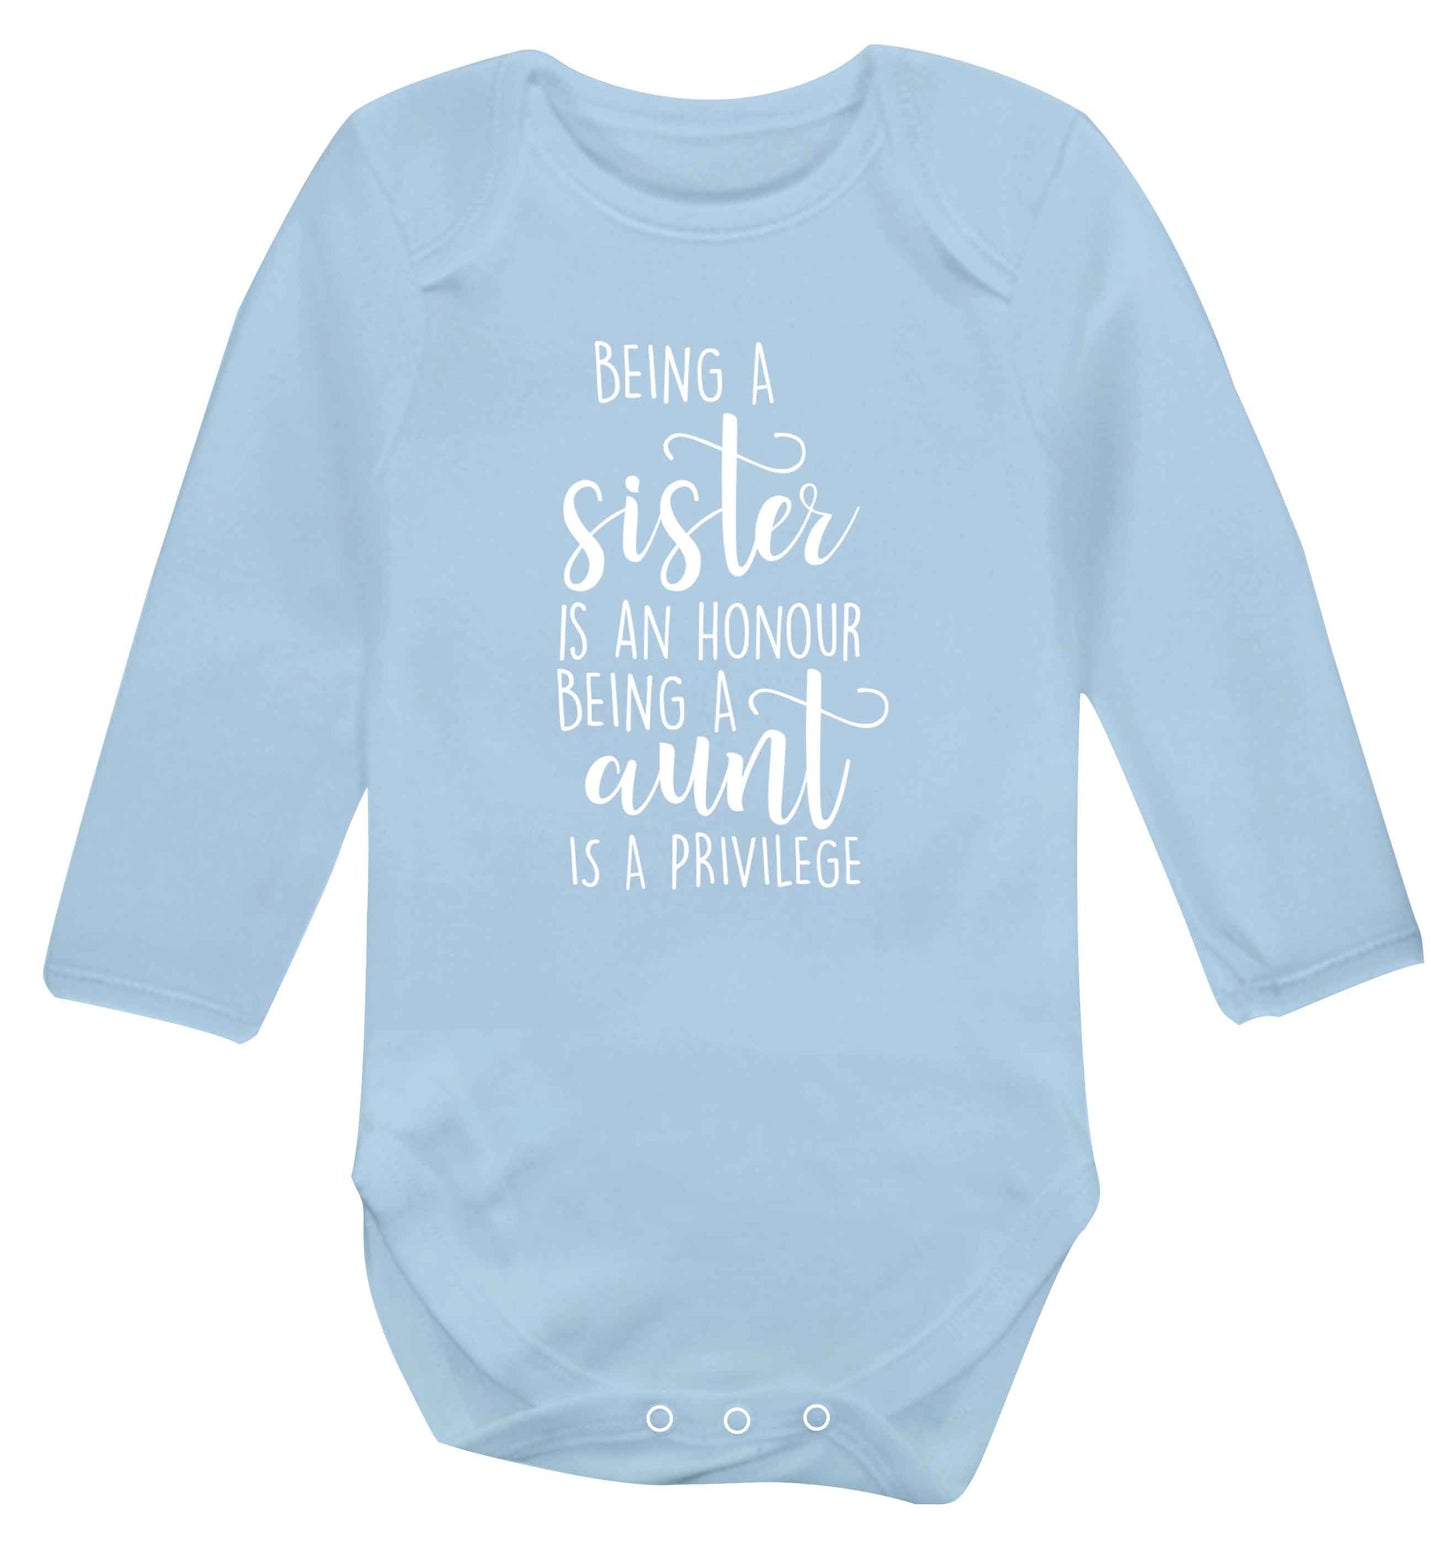 Being a sister is an honour being an auntie is a privilege Baby Vest long sleeved pale blue 6-12 months